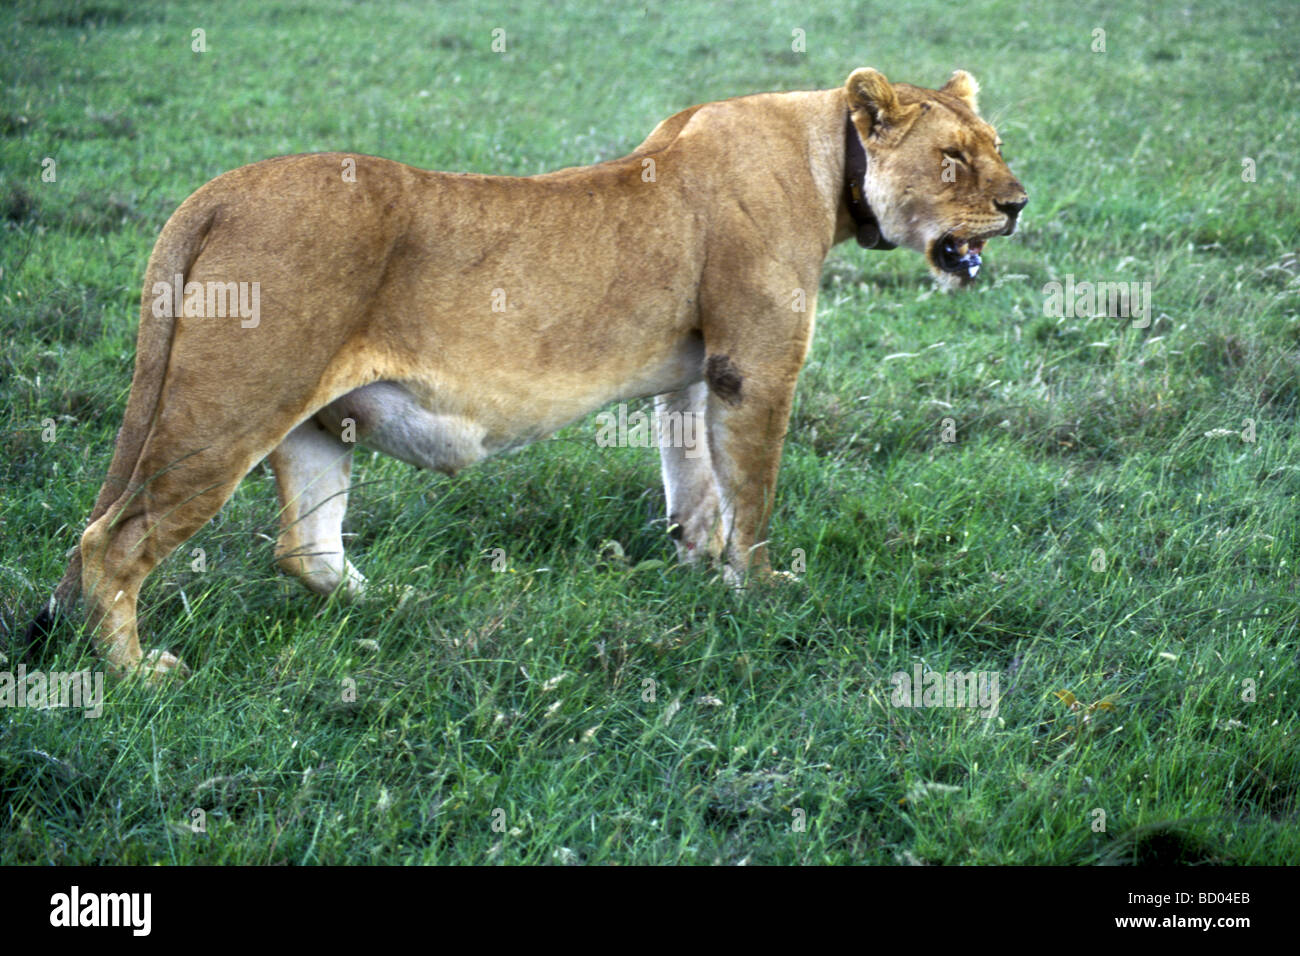 Well fed Lioness with full stomach wearing leather radio collar Serengeti National Park Tanzania East Africa Stock Photo